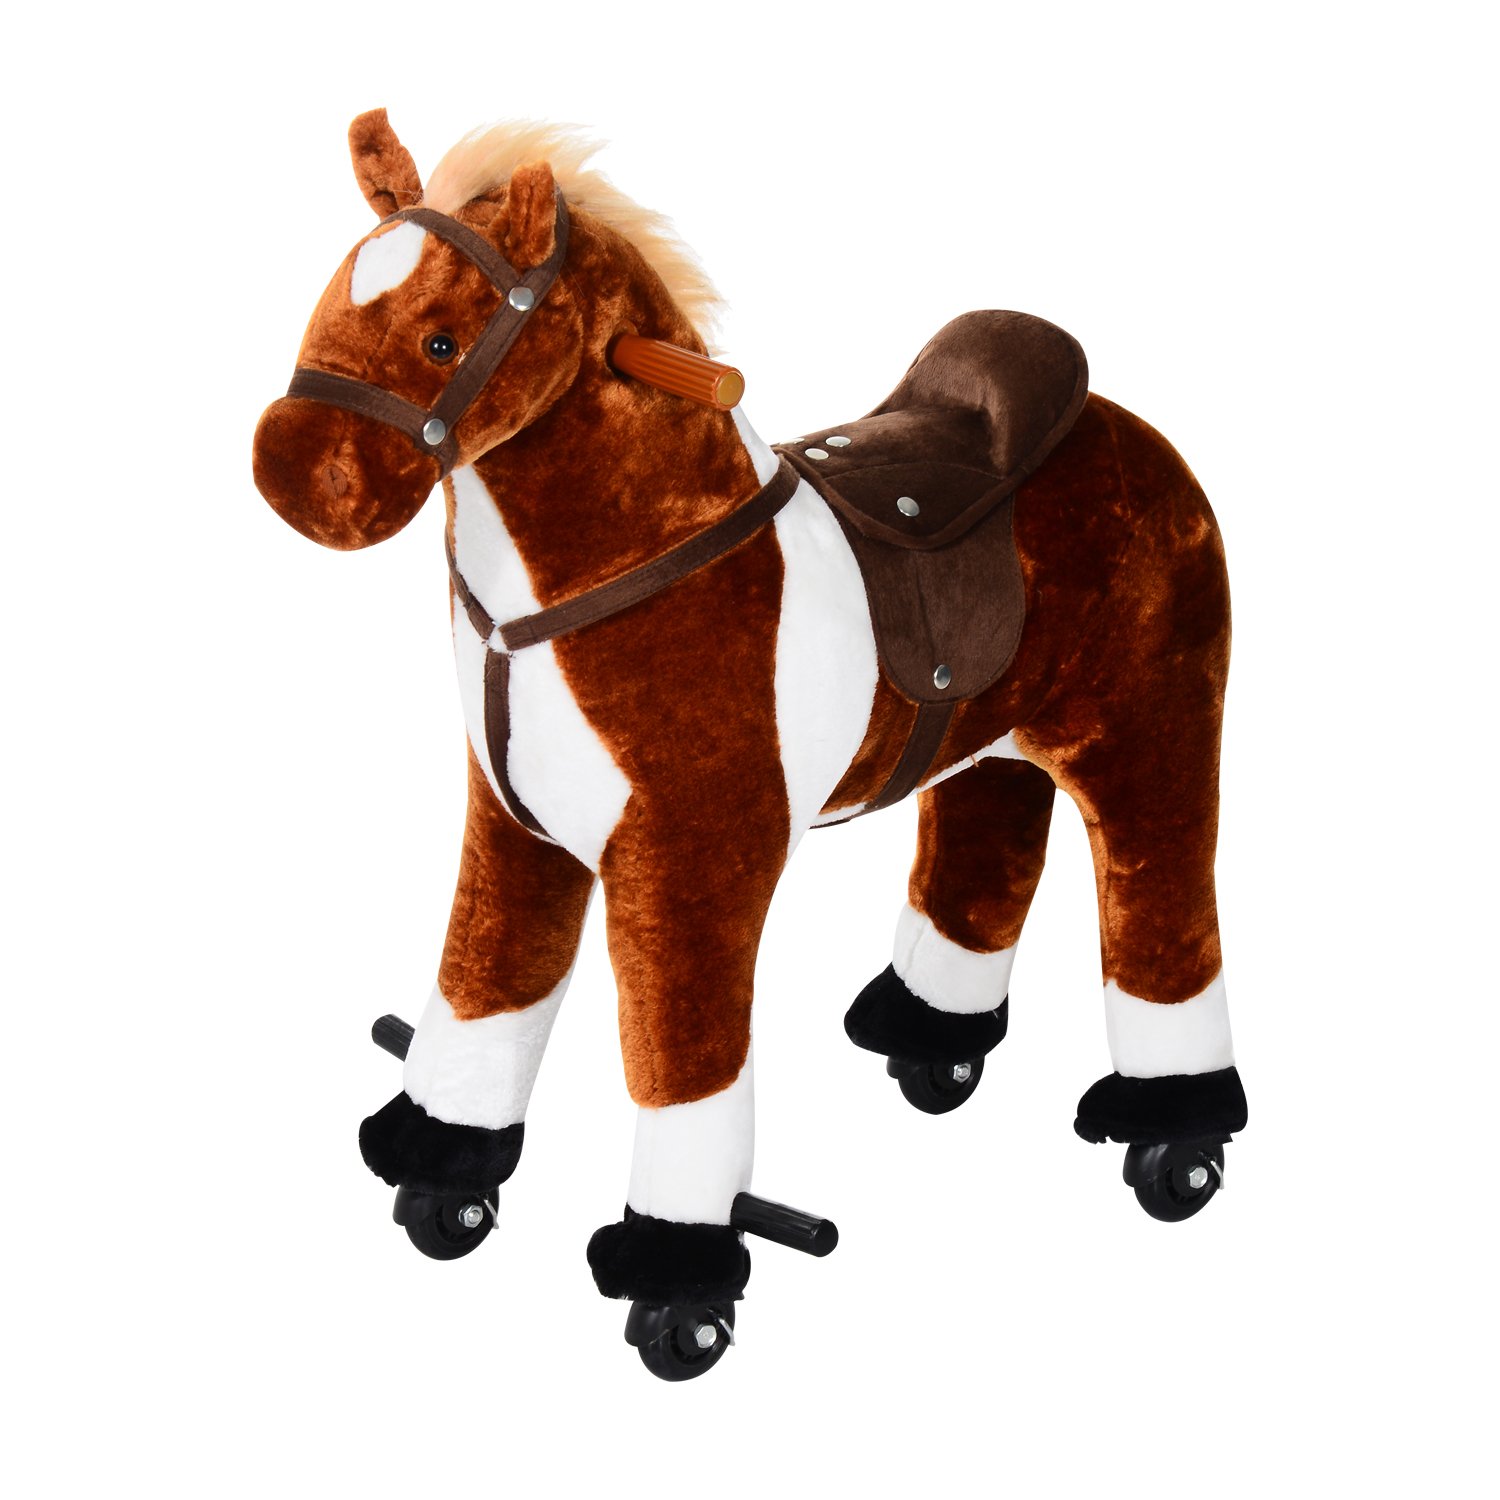 Qaba 30"H Kids Plush Ride On Toy Walking Horse with Wheels and Realistic Sounds - Brown